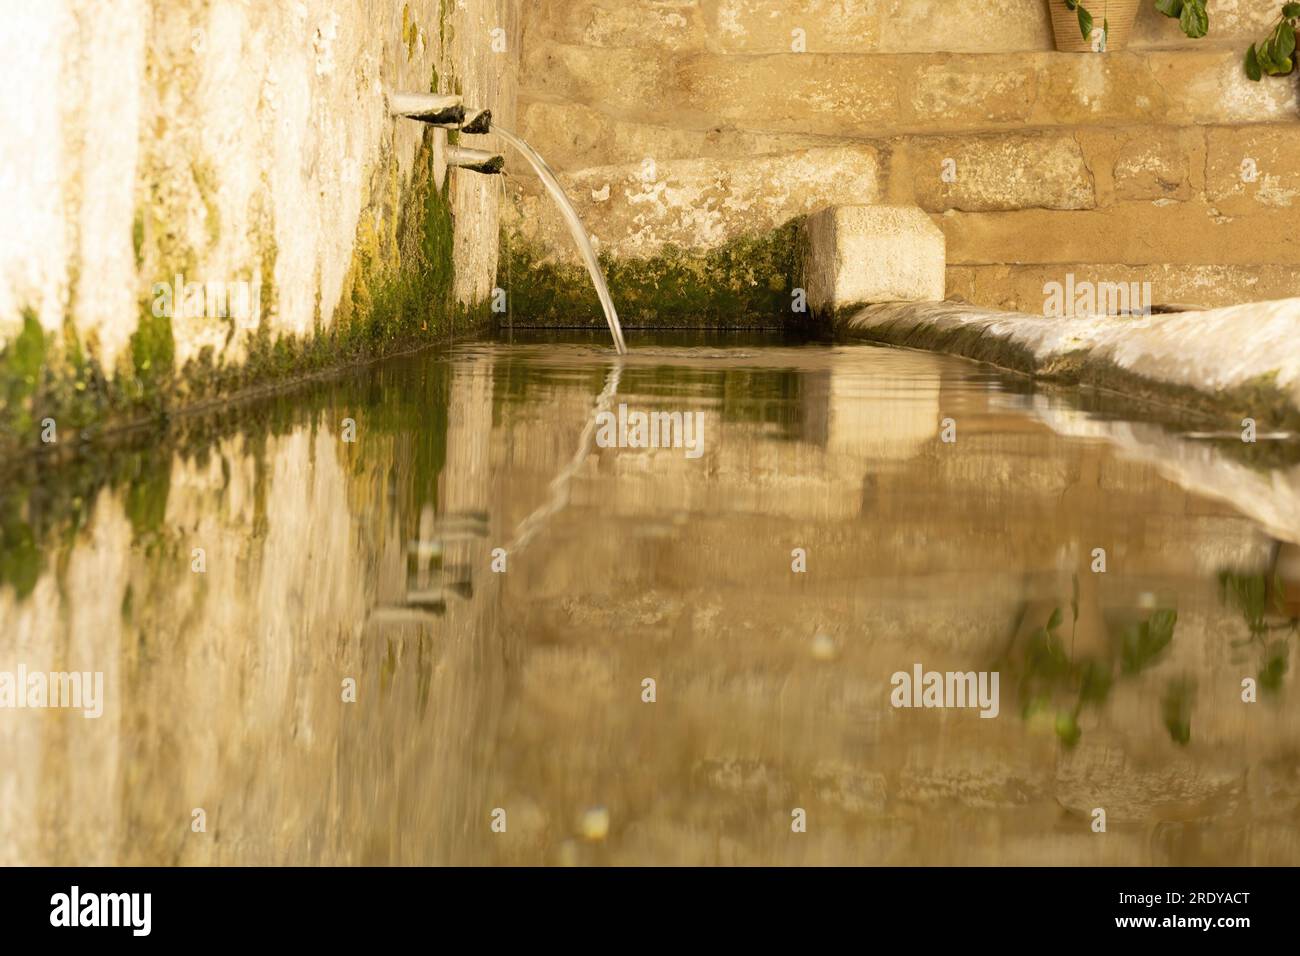 Clear and crystalline water comes out of a public fountain in the town of Castellote, Teruel, Aragon, Spain, Maestrazgo, beautiful reflections in the Stock Photo